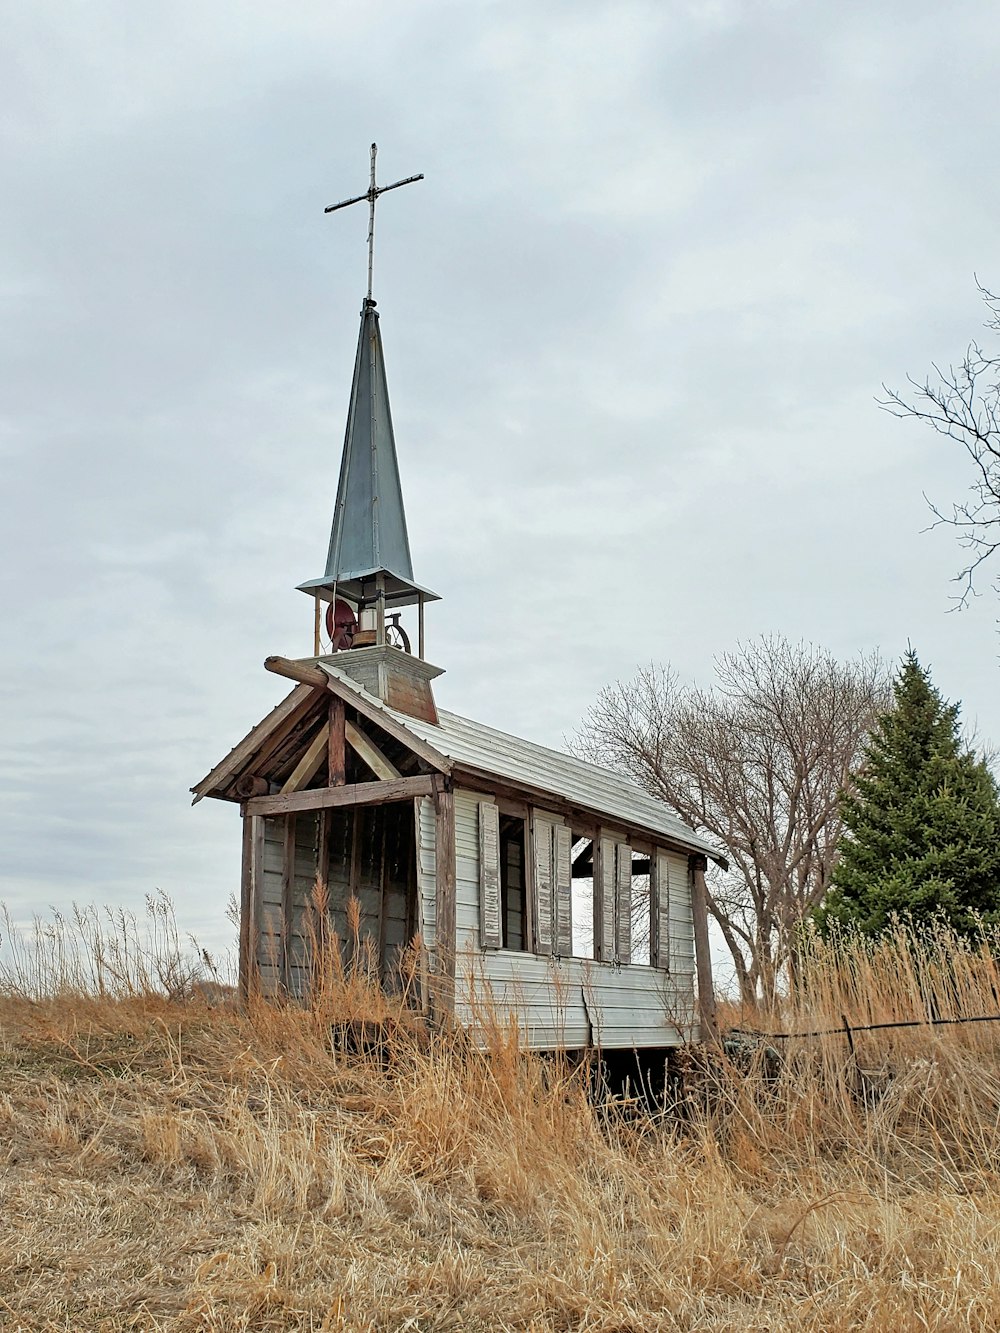 a small wooden building with a steeple